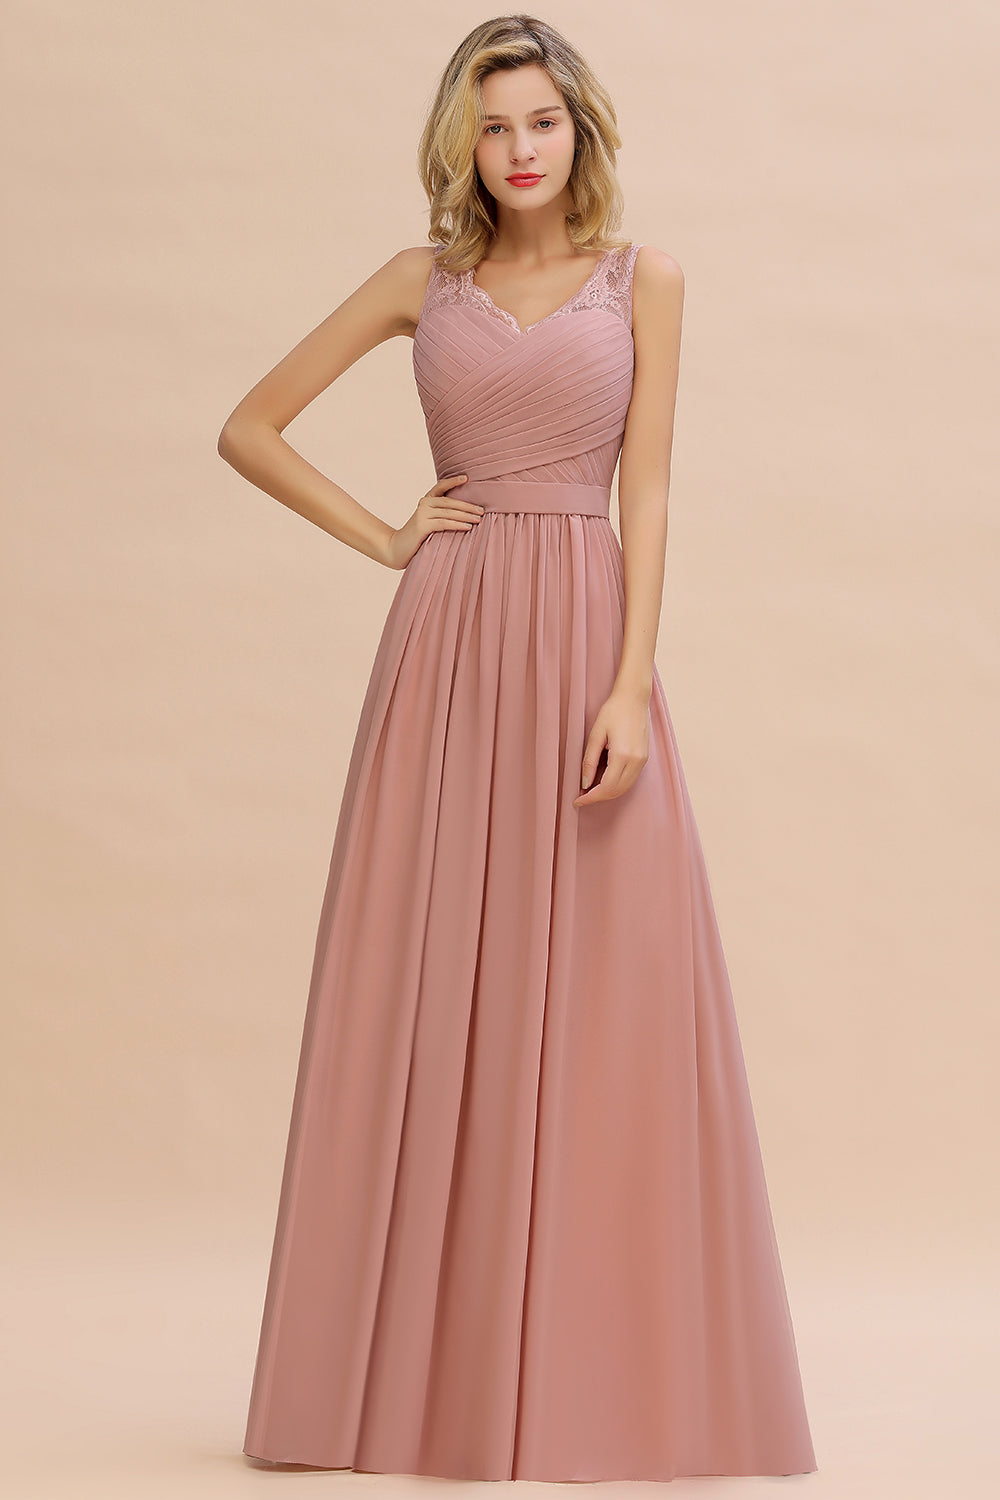 Classy Long A-line V-neck Wide Straps Ruched Chiffon Bridesmaid Dress-BIZTUNNEL